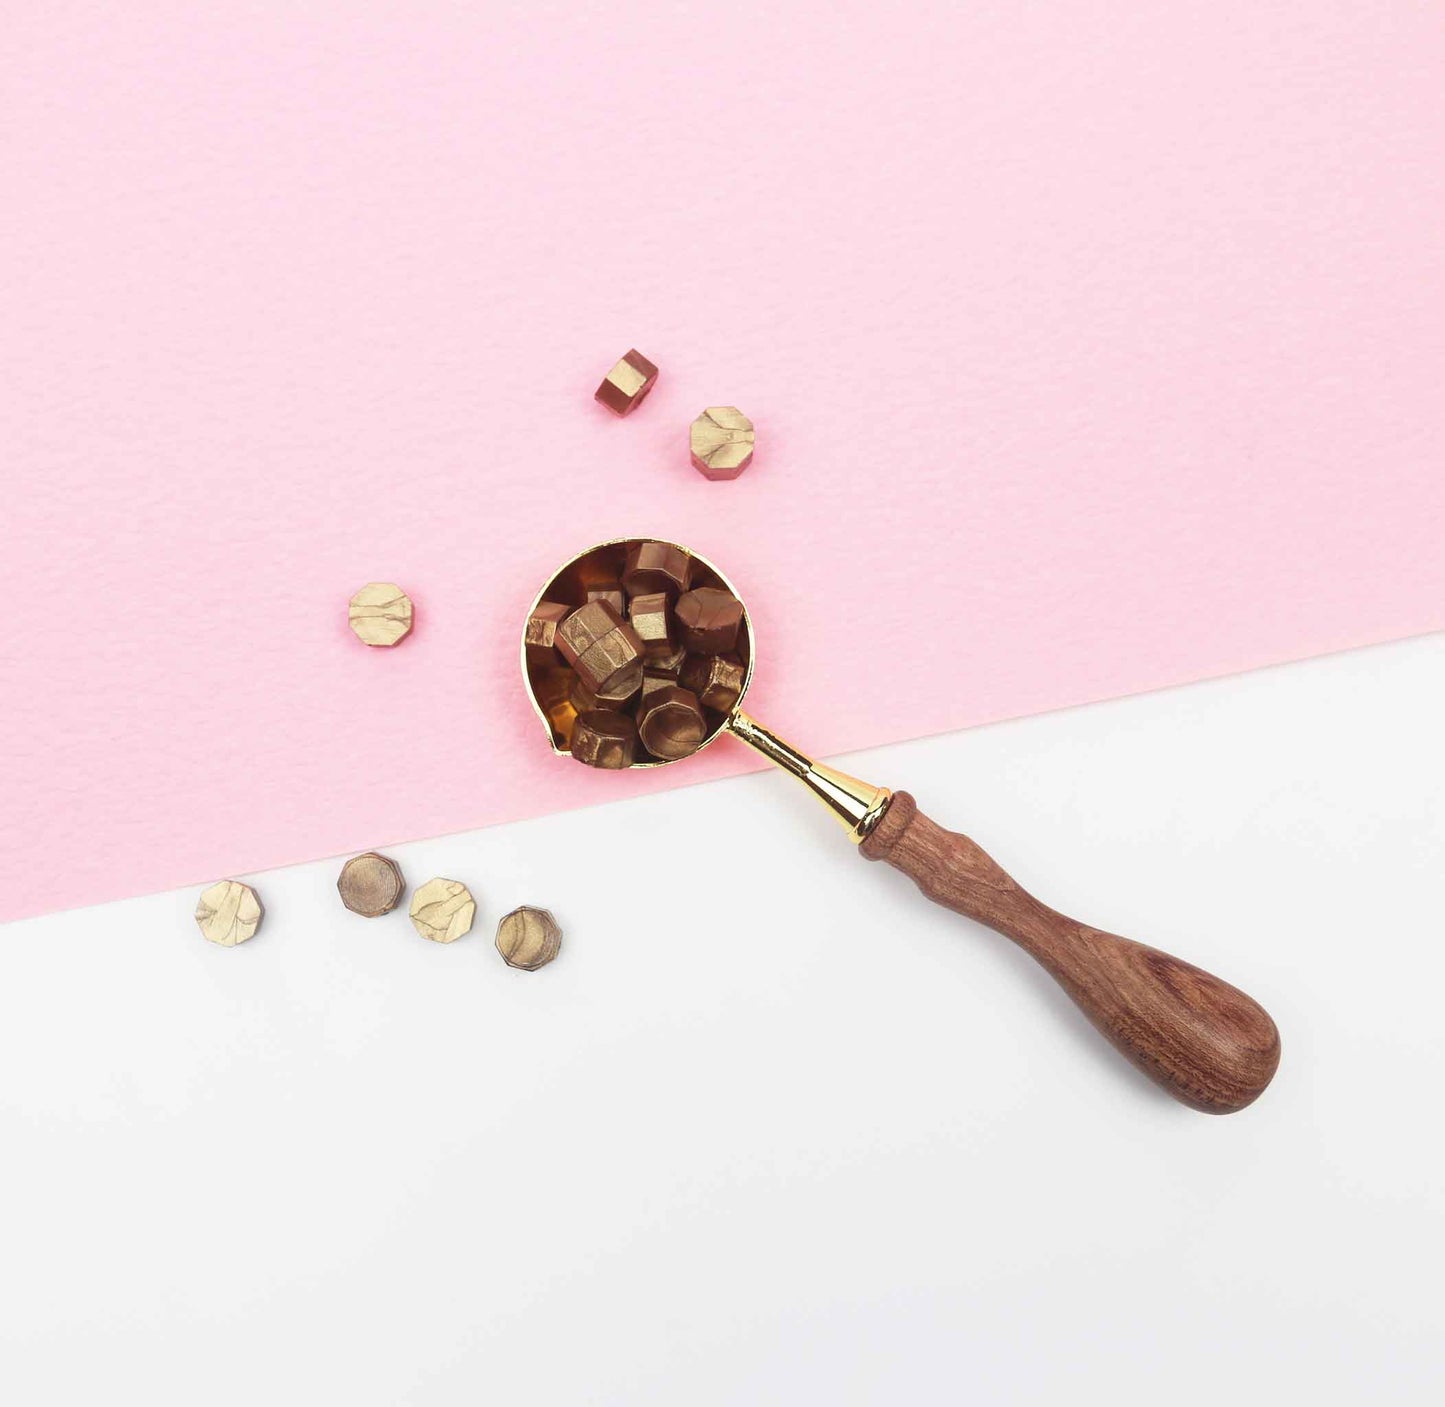 Rosewood & Beech Wood Gold Melting Spoon